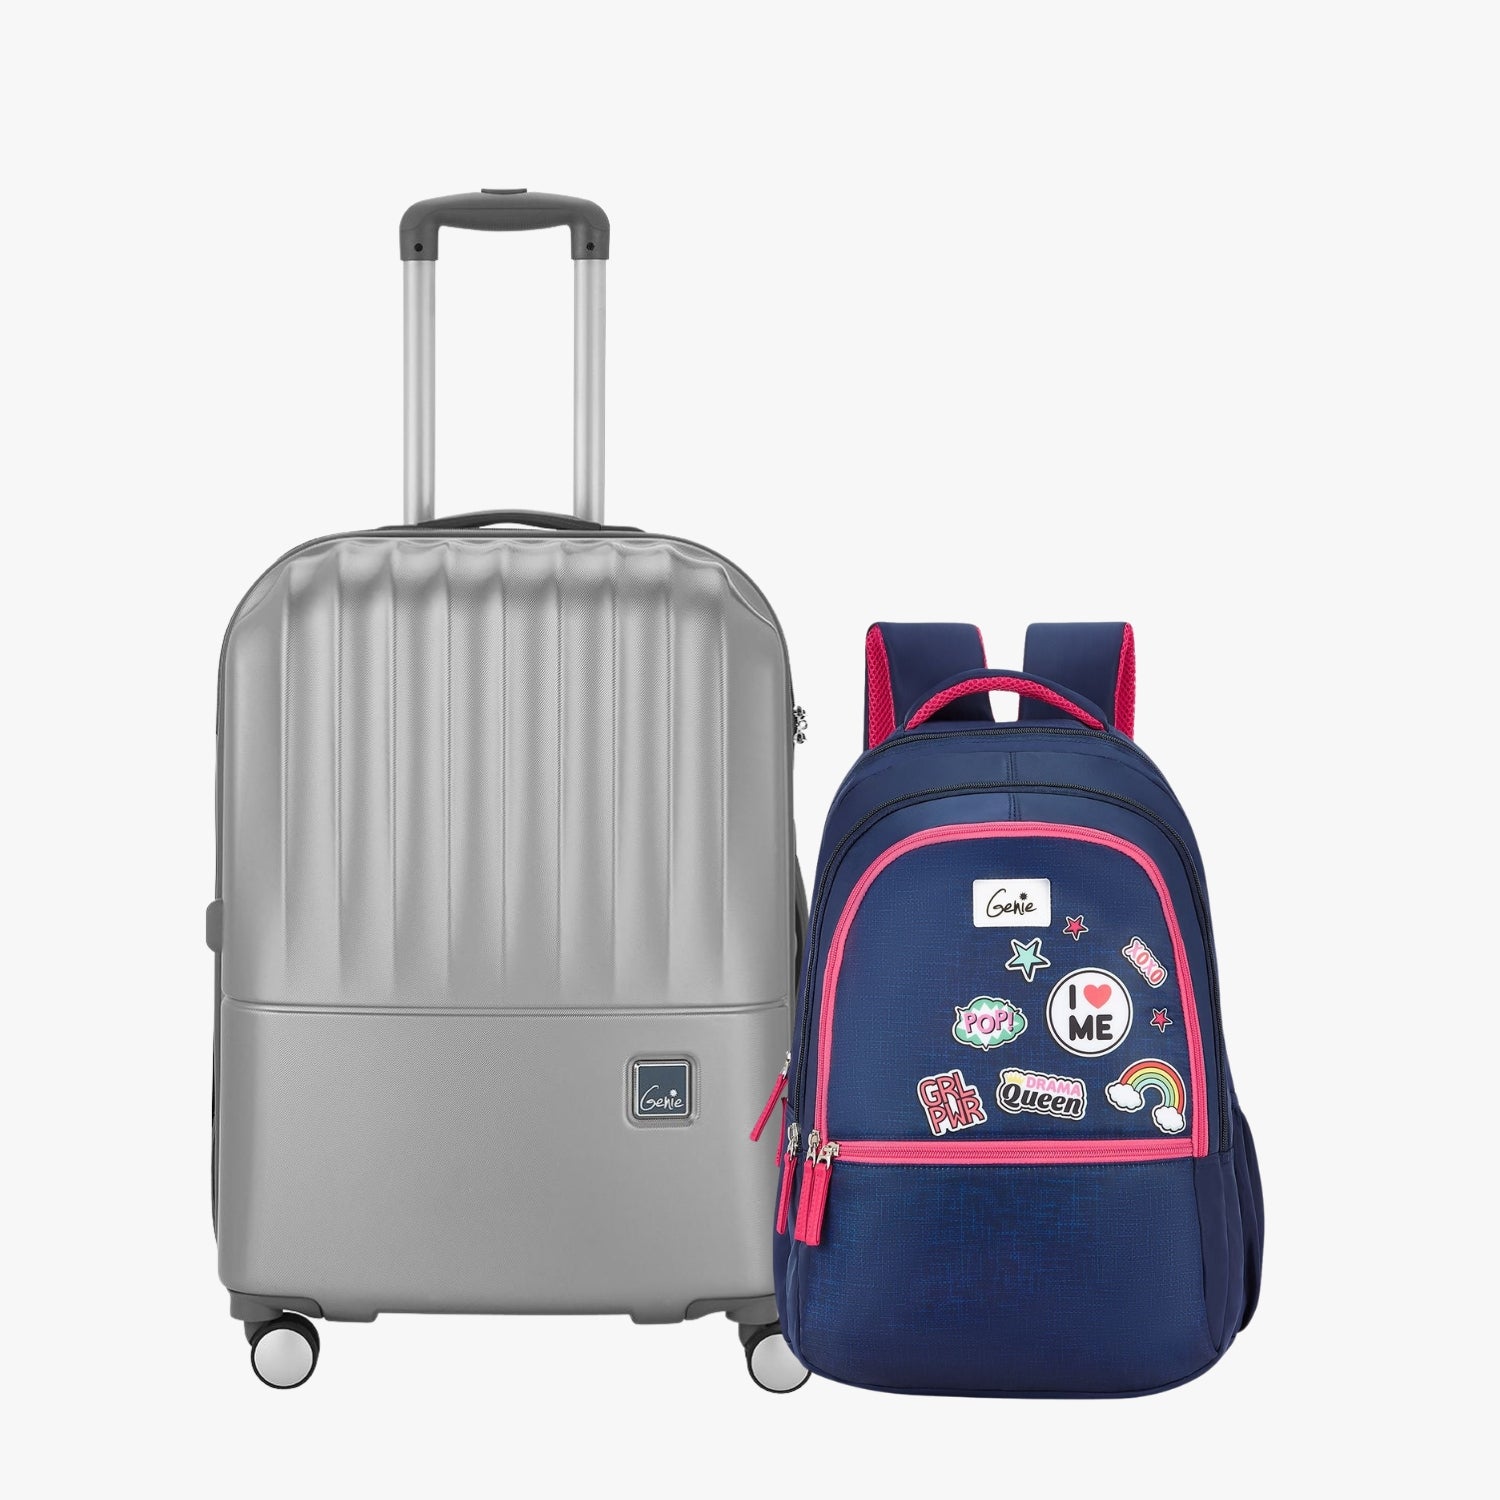 Genie Hard Trolley Bag and Laptop Backpack Combo